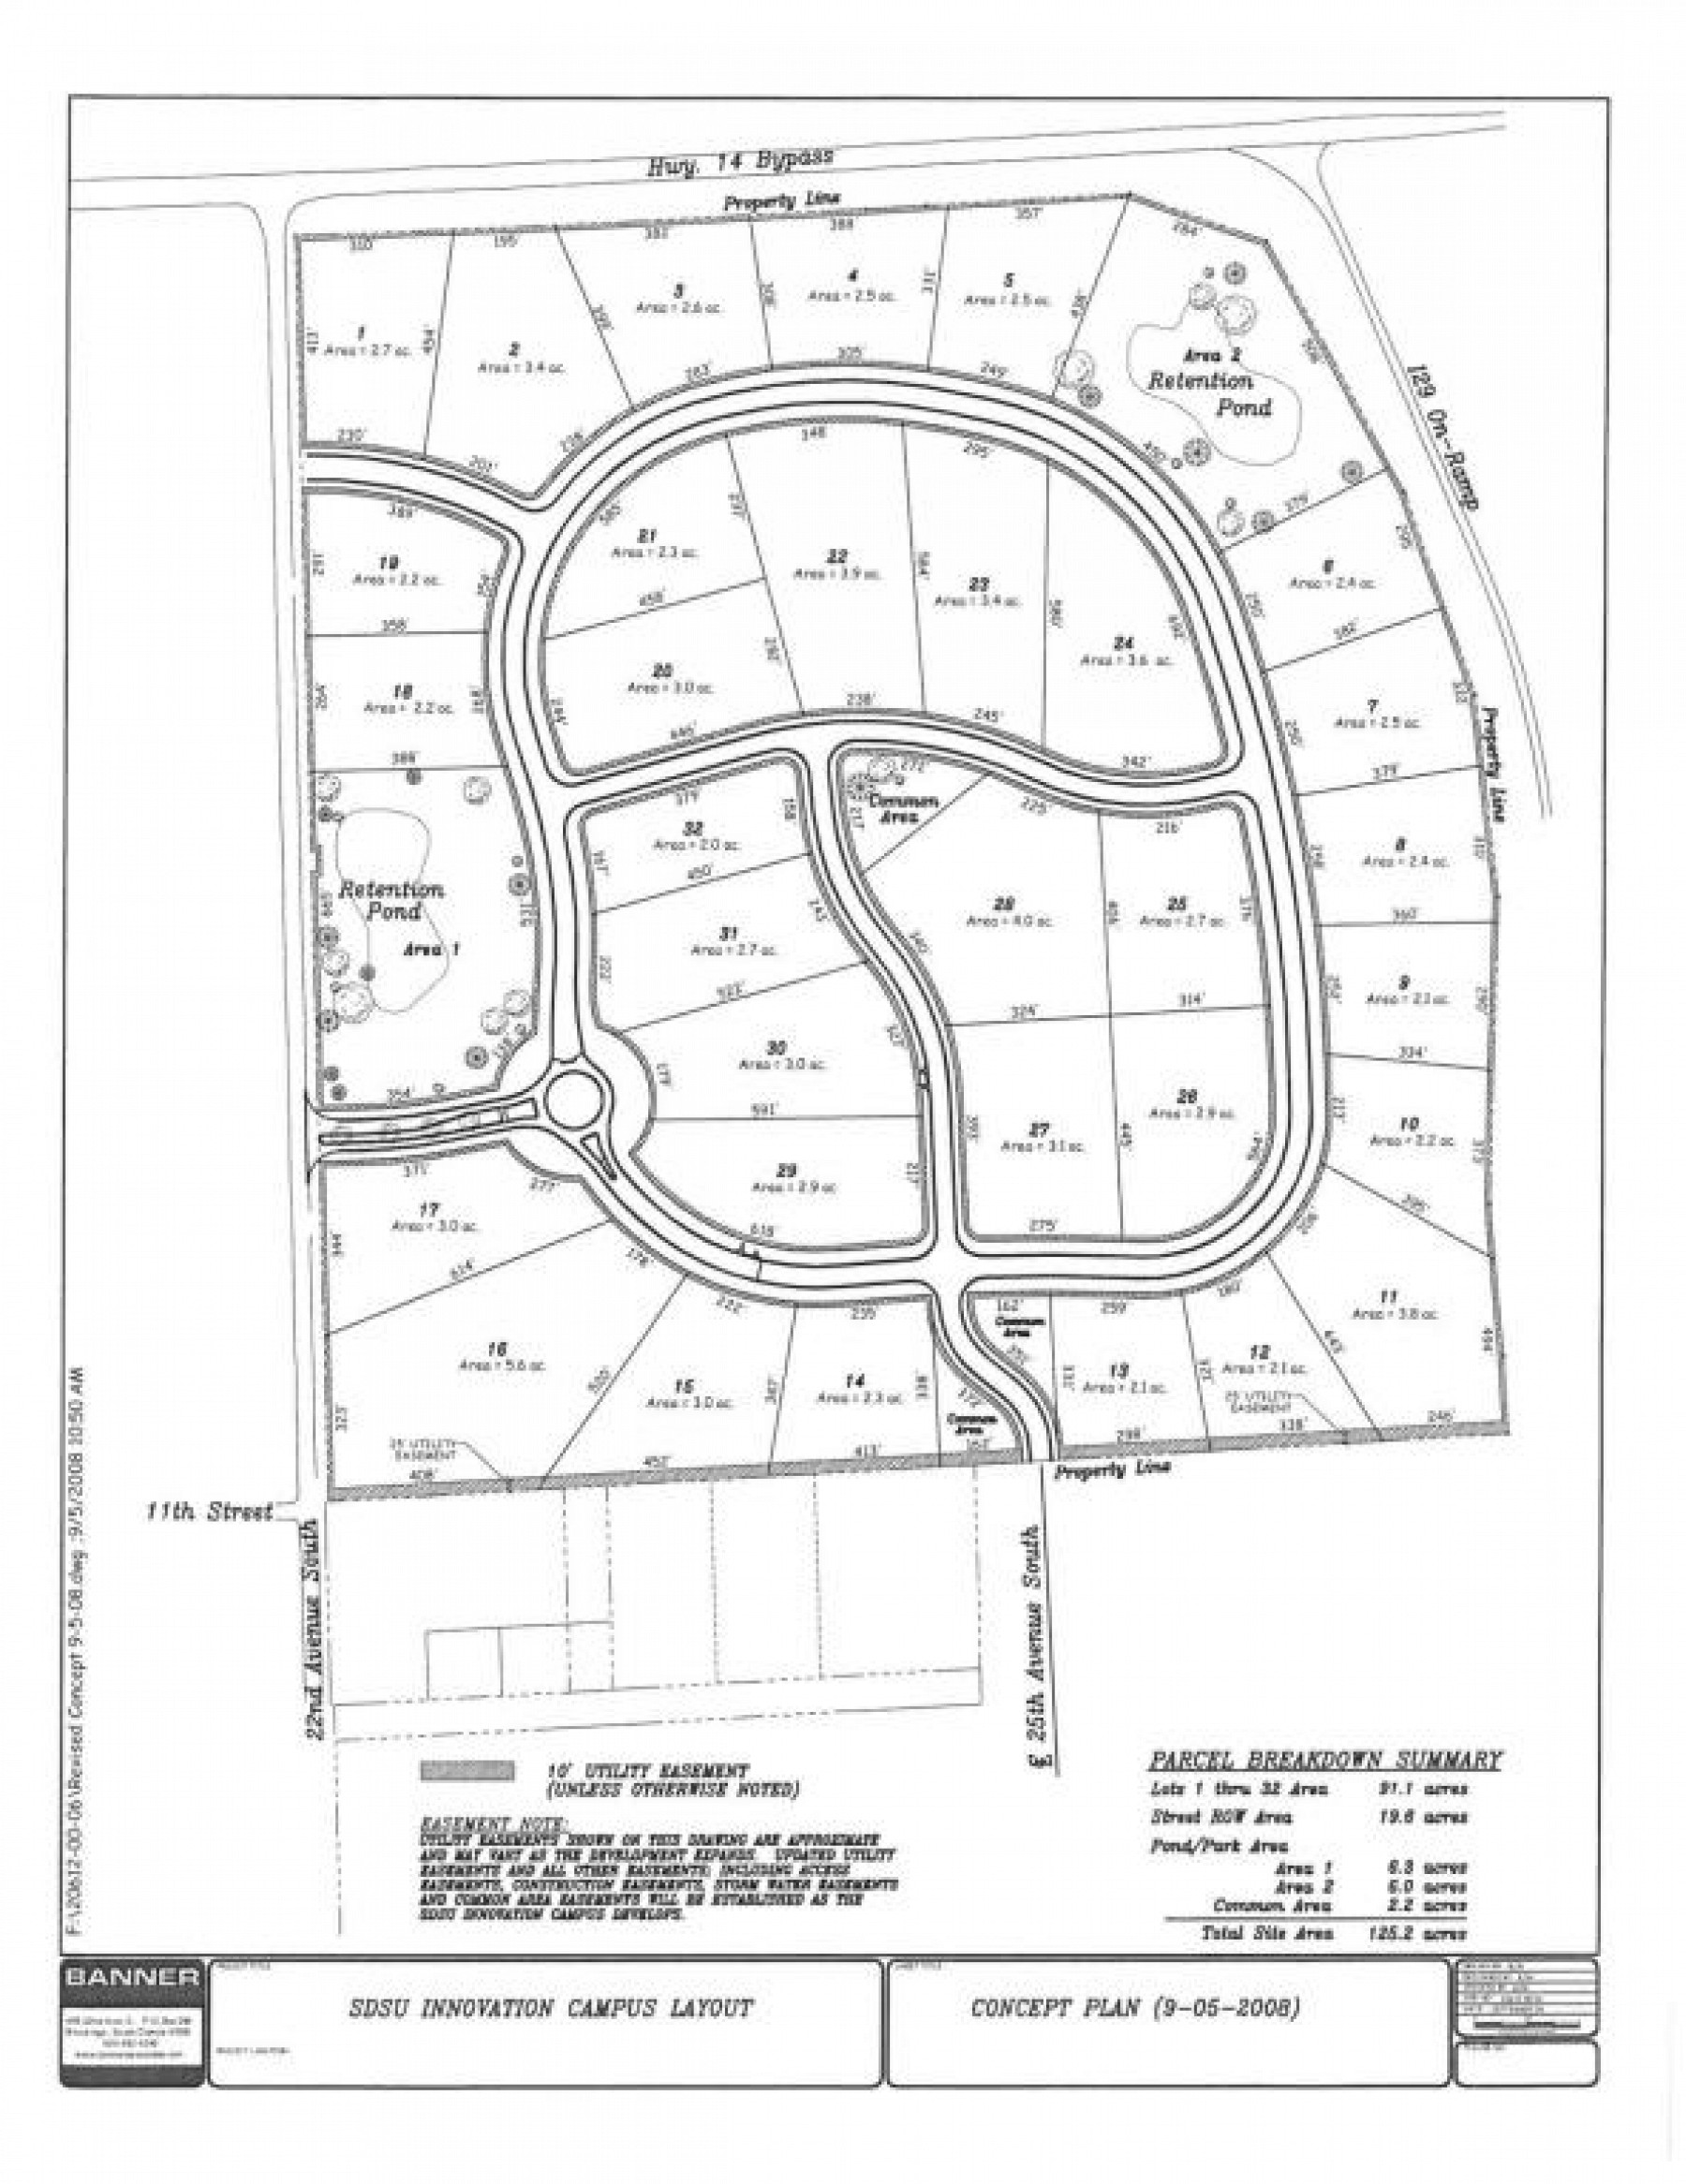 Lot 7 Innovation Campus, Brookings, SD 57006